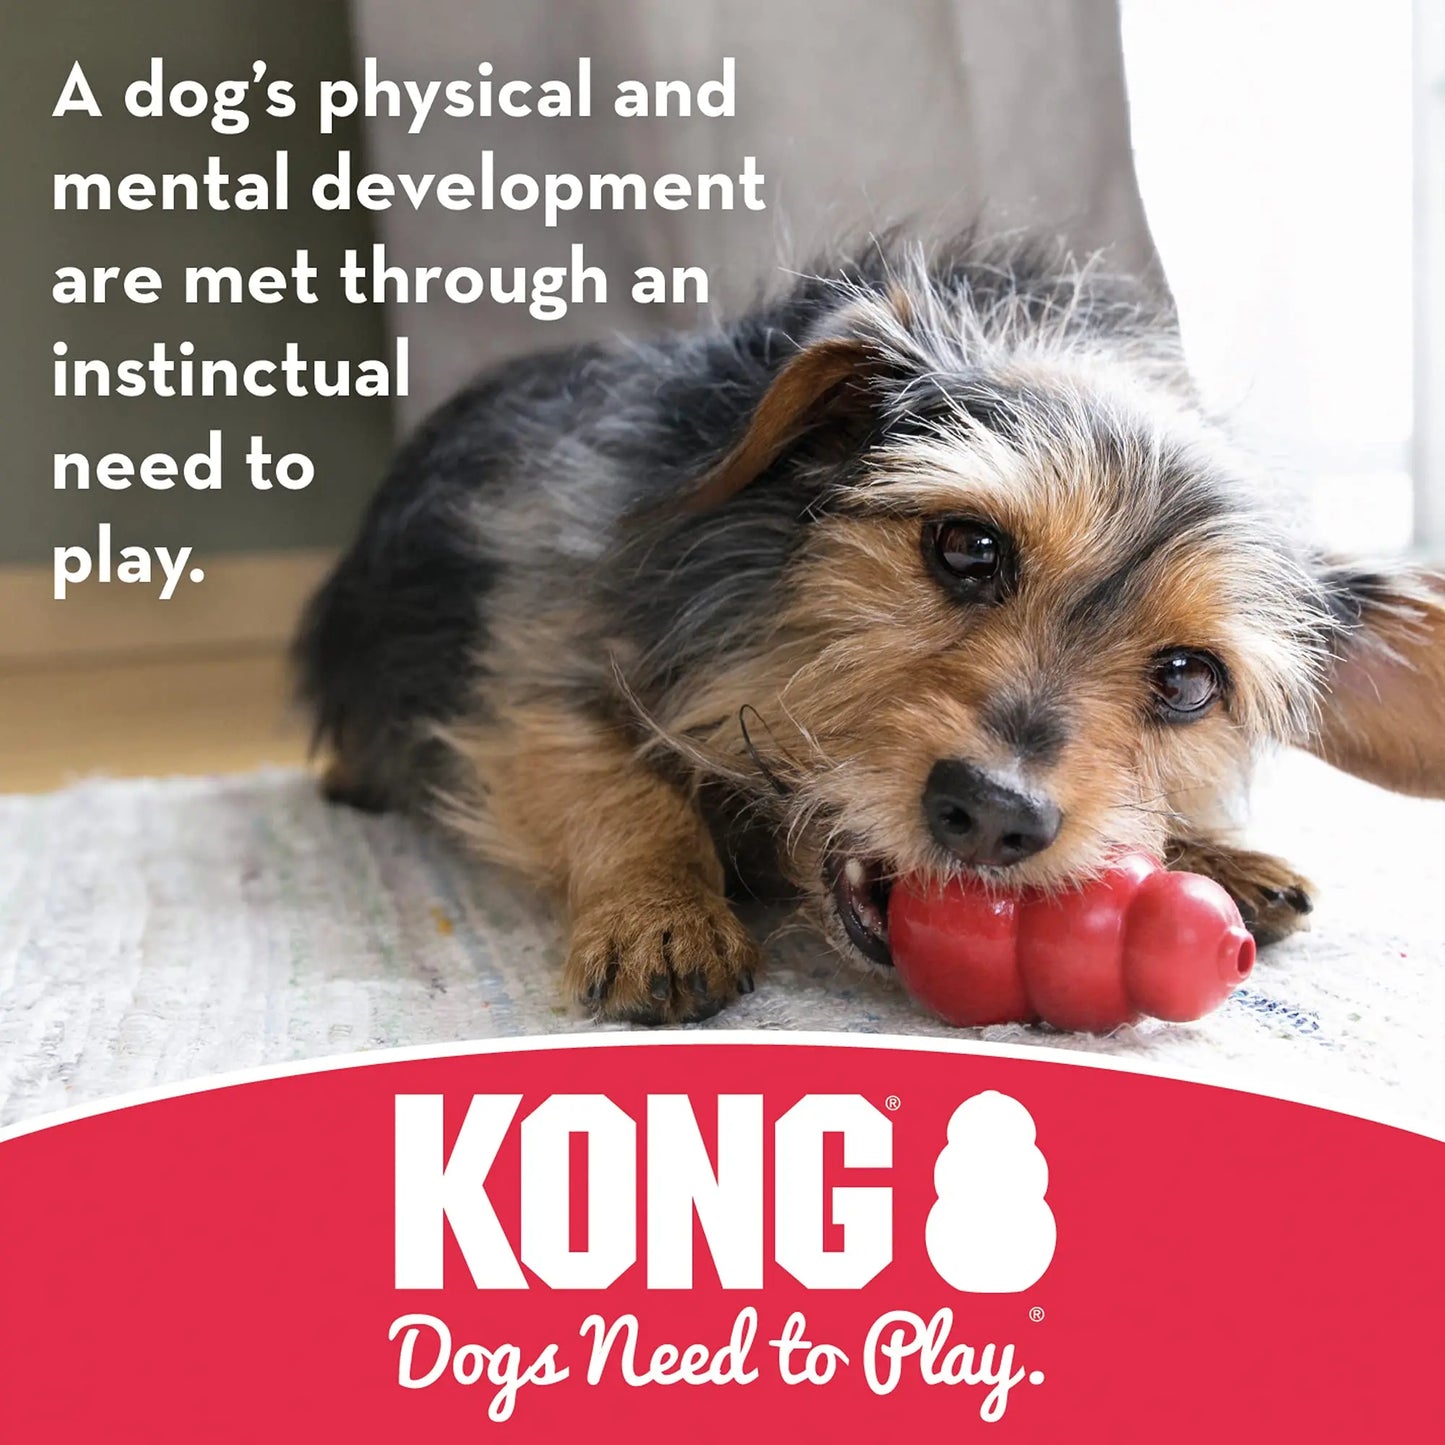 KONG Tires, Durable Rubber Chew Toy for Treats